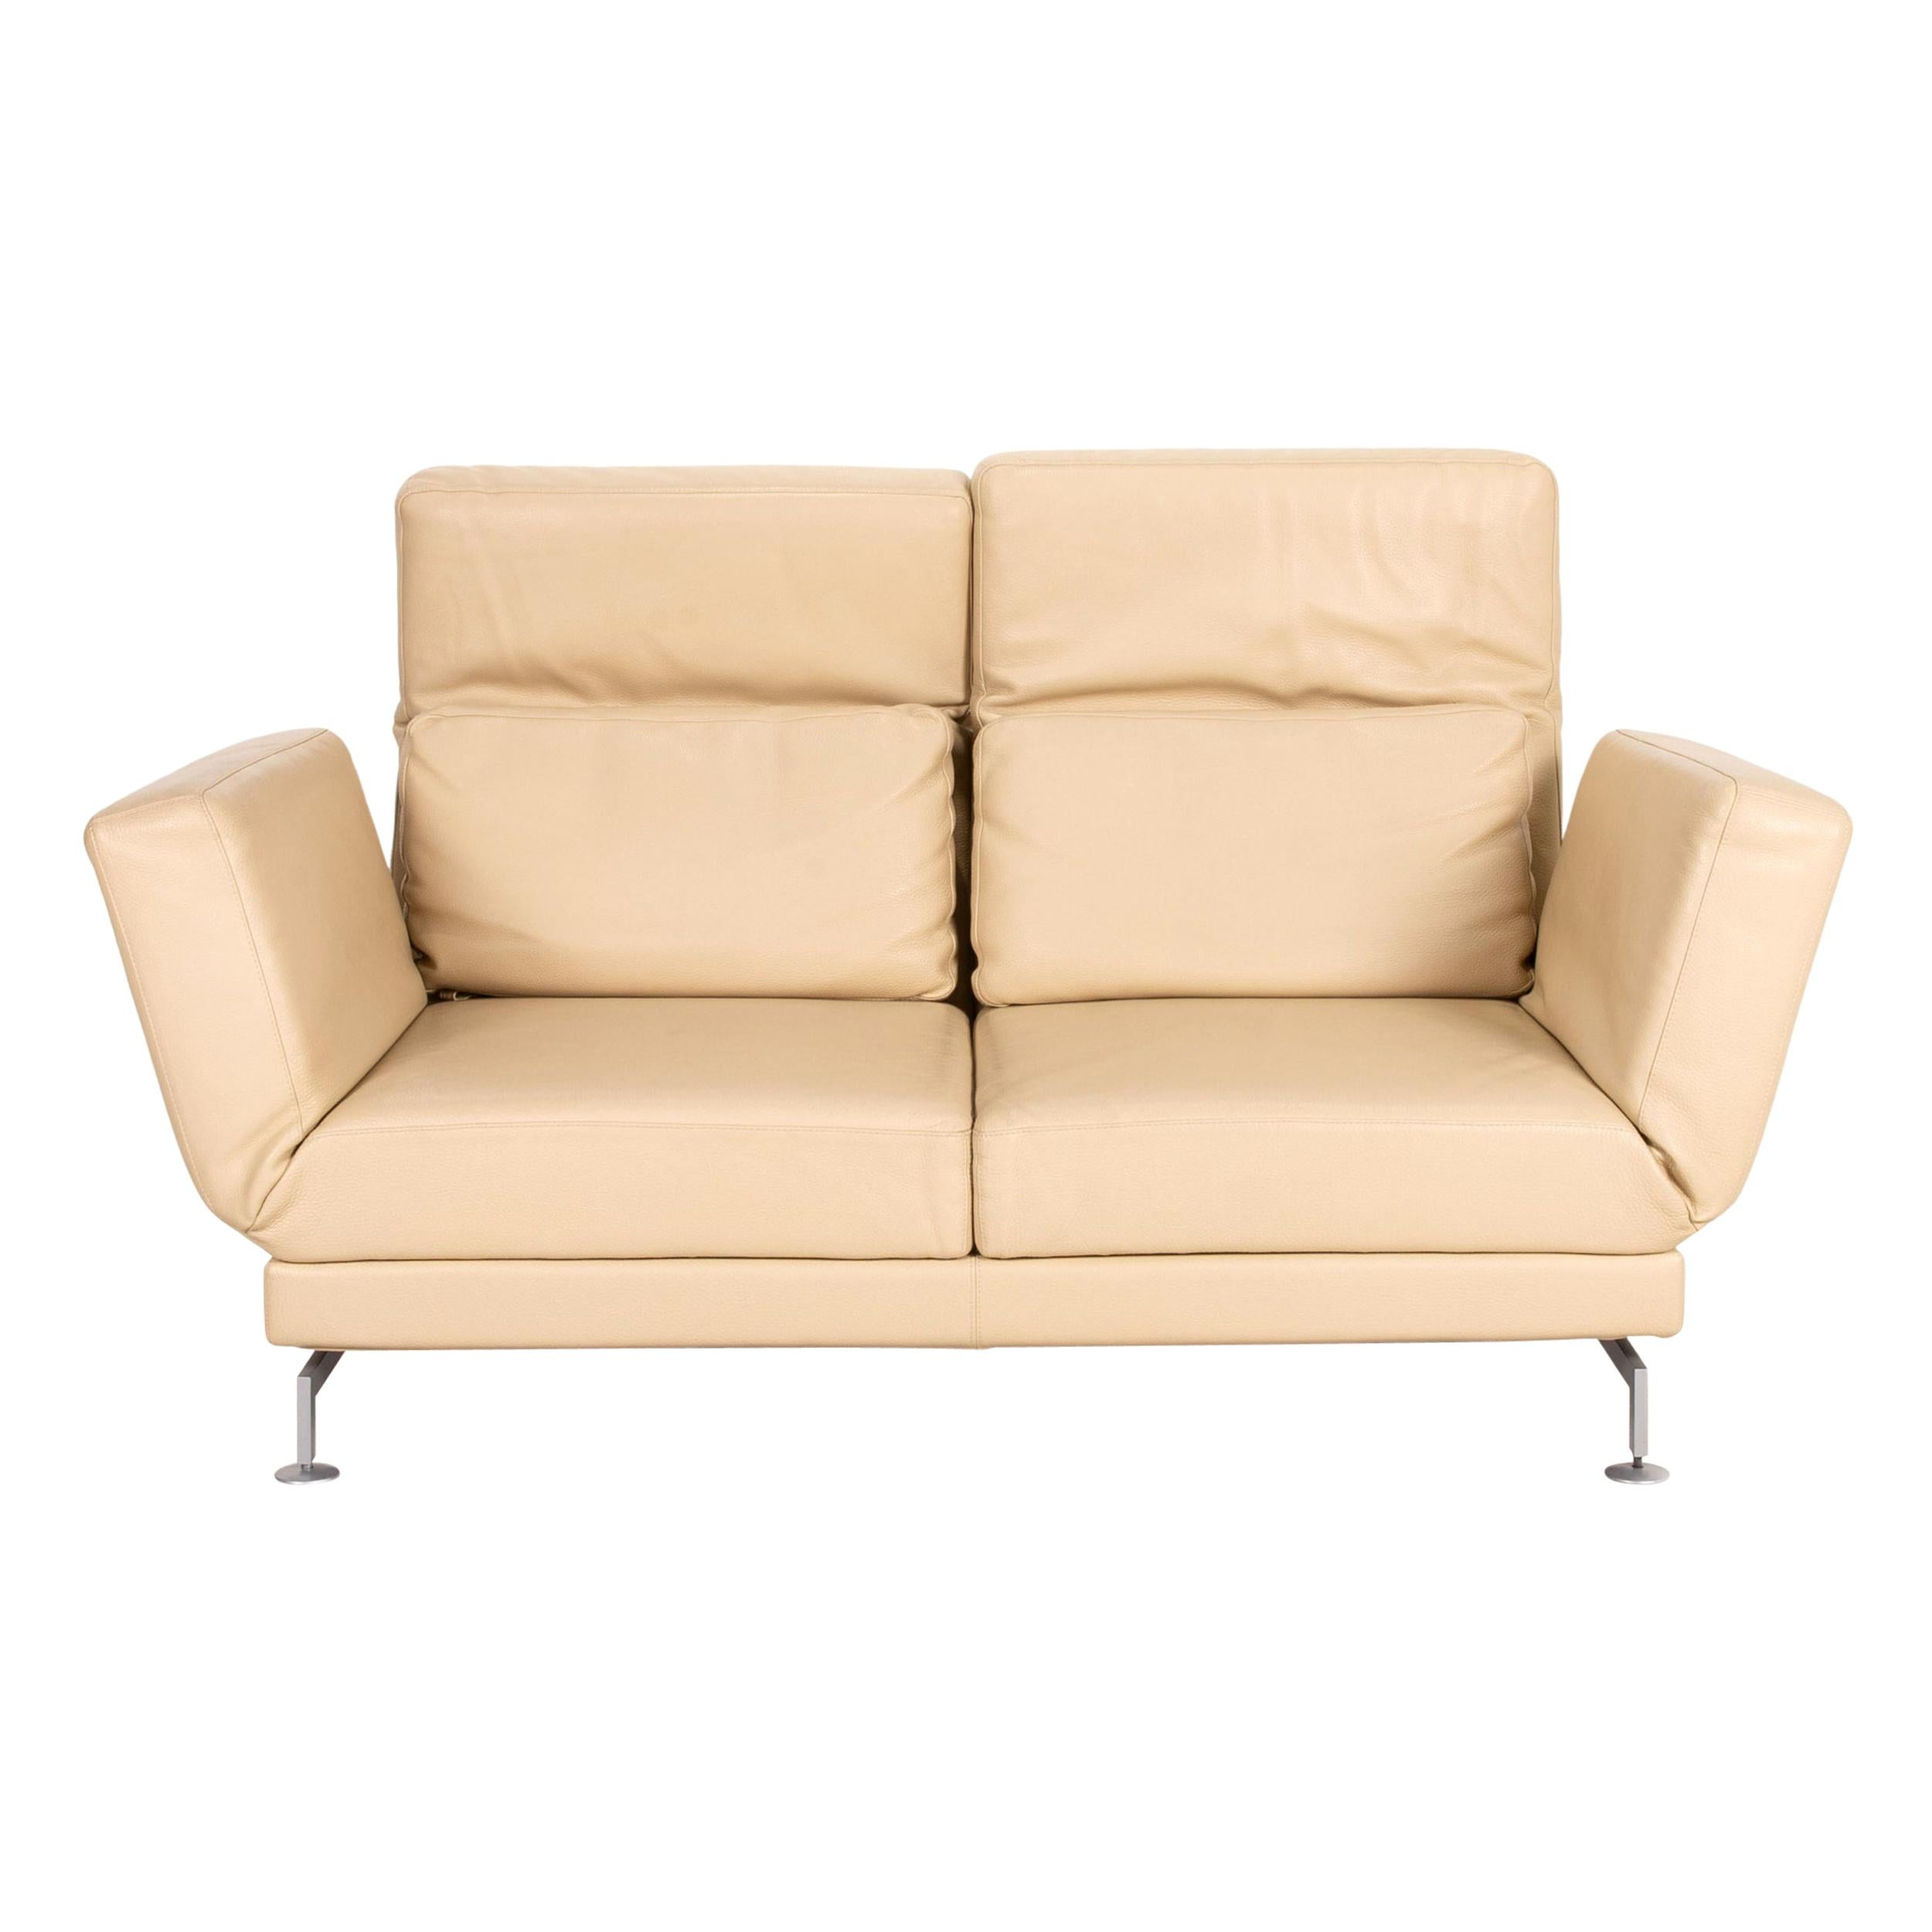 Brühl & Sippold Moule Leather Sofa Cream Two-Seater Function Relax Function For Sale